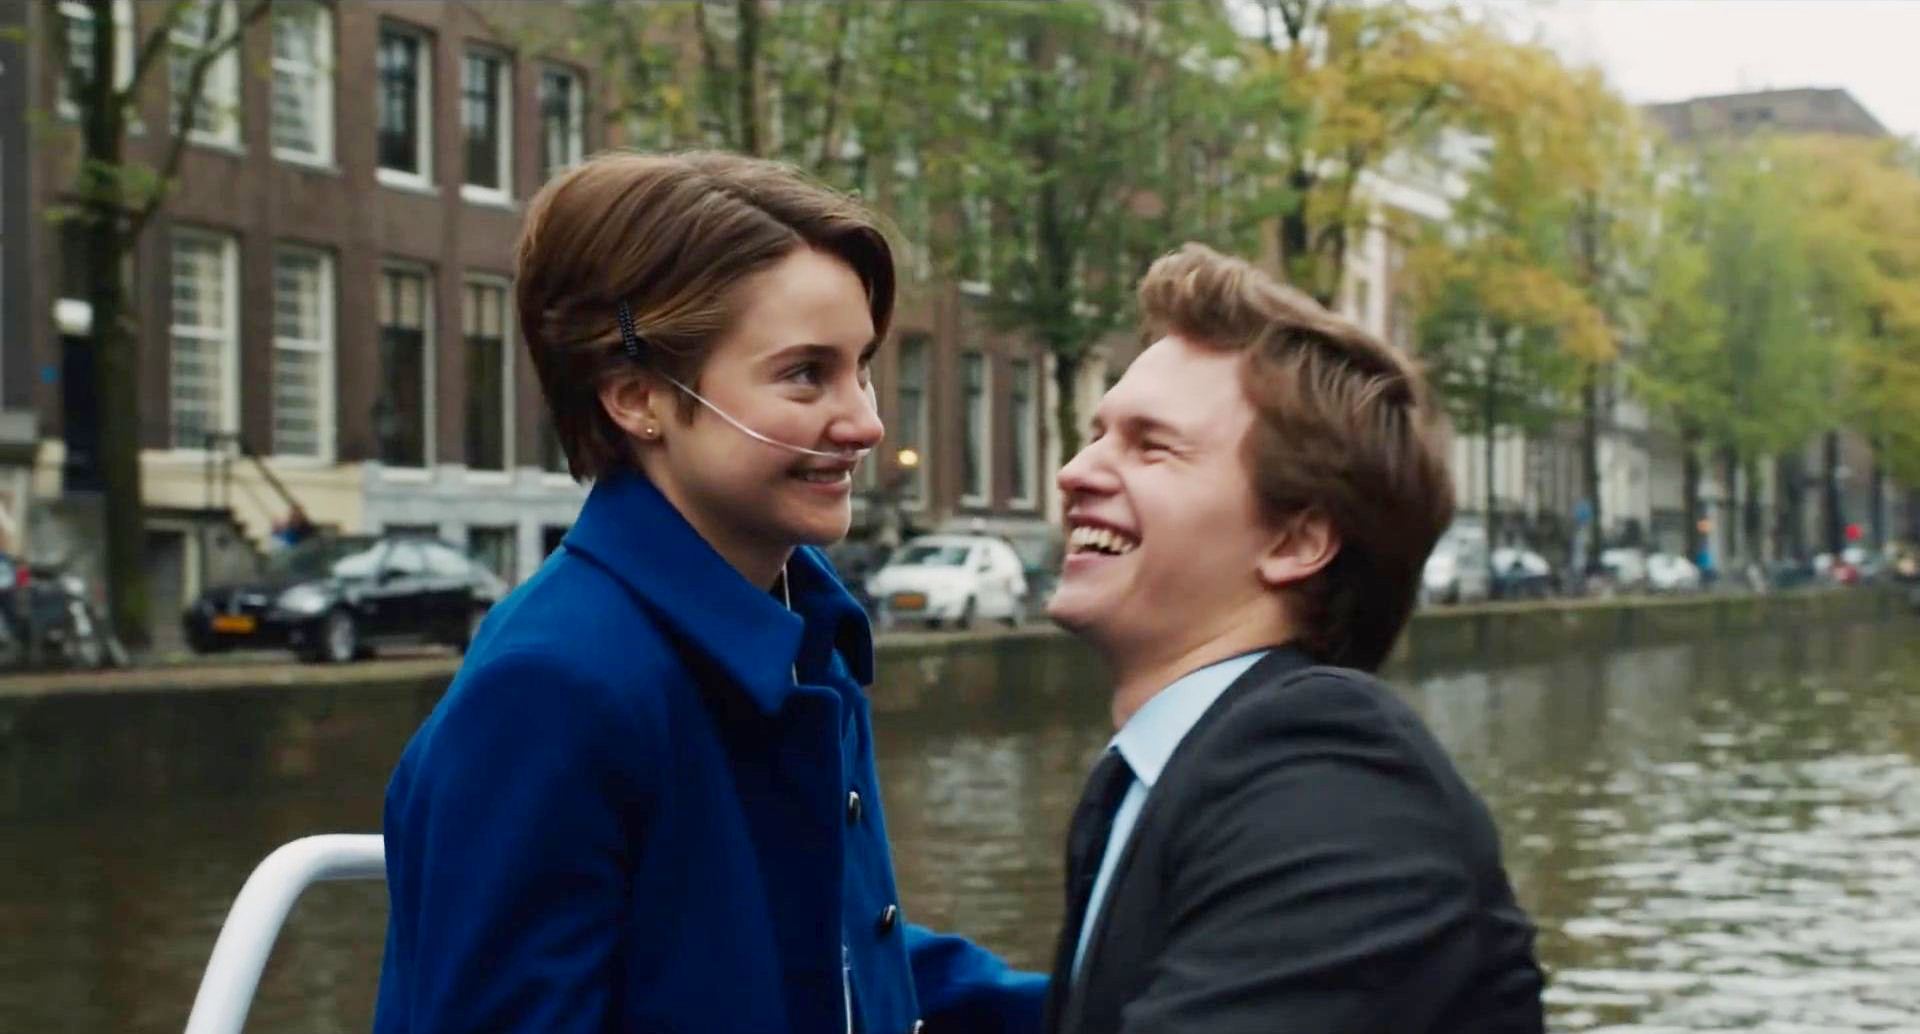 The Fault In Our Stars Ending Explained